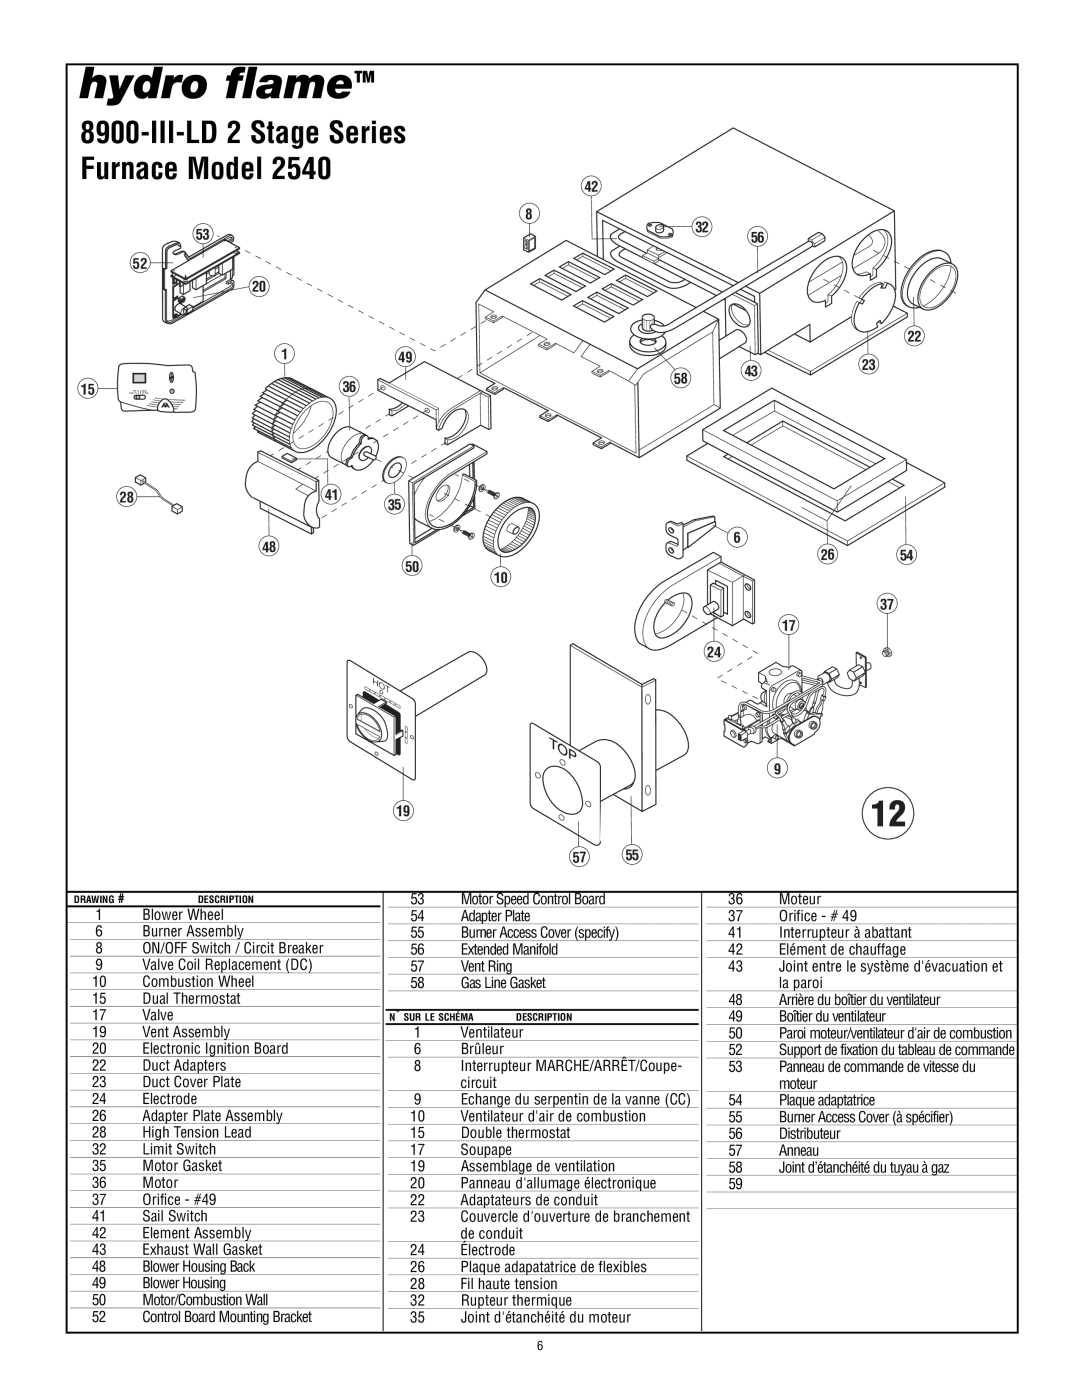 Atwood Mobile Products 2540 installation manual hydro flameTM, III-LD2 Stage Series Furnace Model 